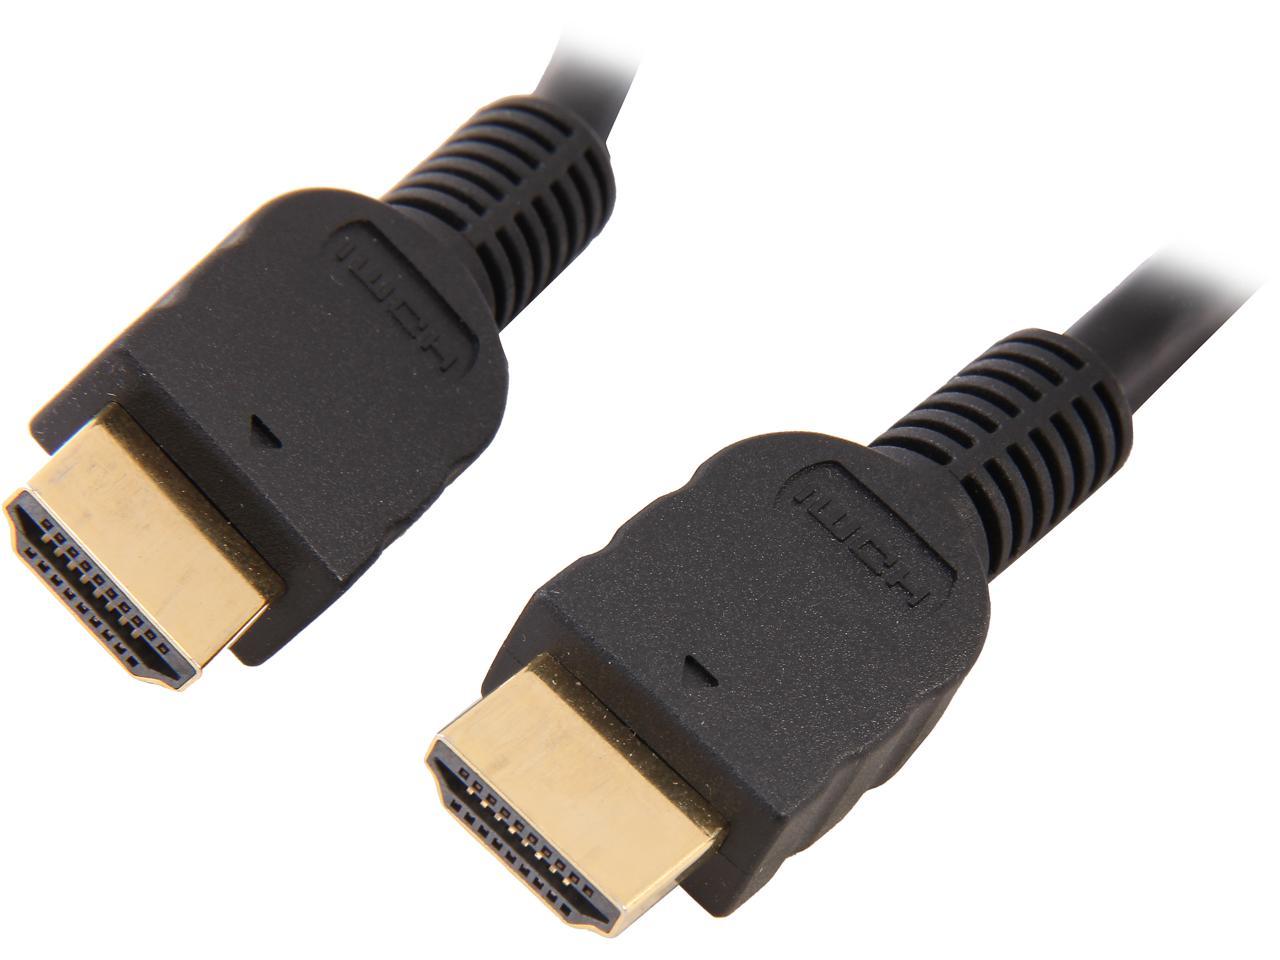 Gold High Speed HDMI 1.4 Standard Premium Cable 6FT Lot wholesale Black 